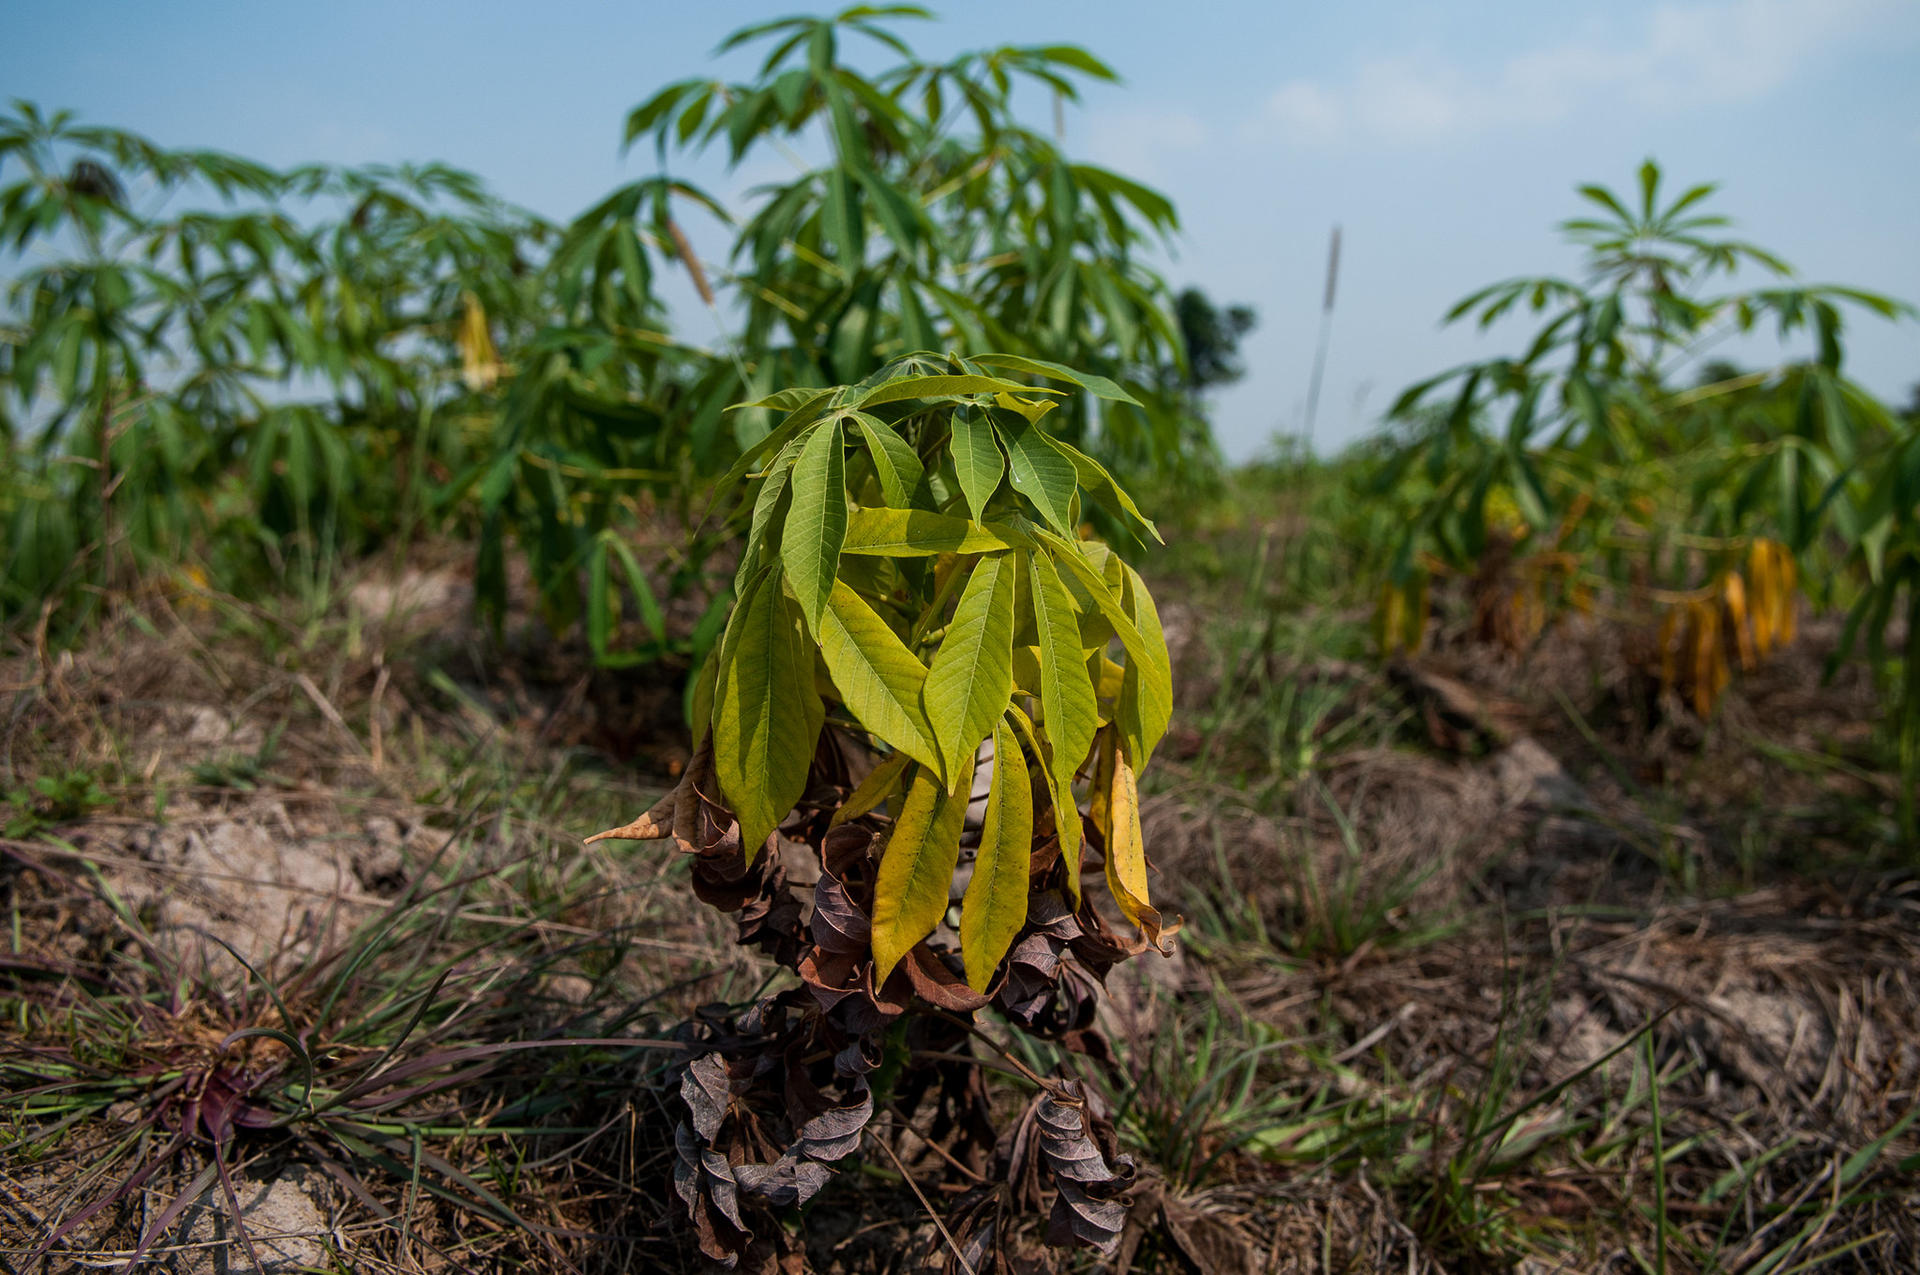 Cassava crop in Cambodia displaying symptoms of cassava witches' broom disease with the yellowing of leaves. ©2014CIAT/GeorginaSmith